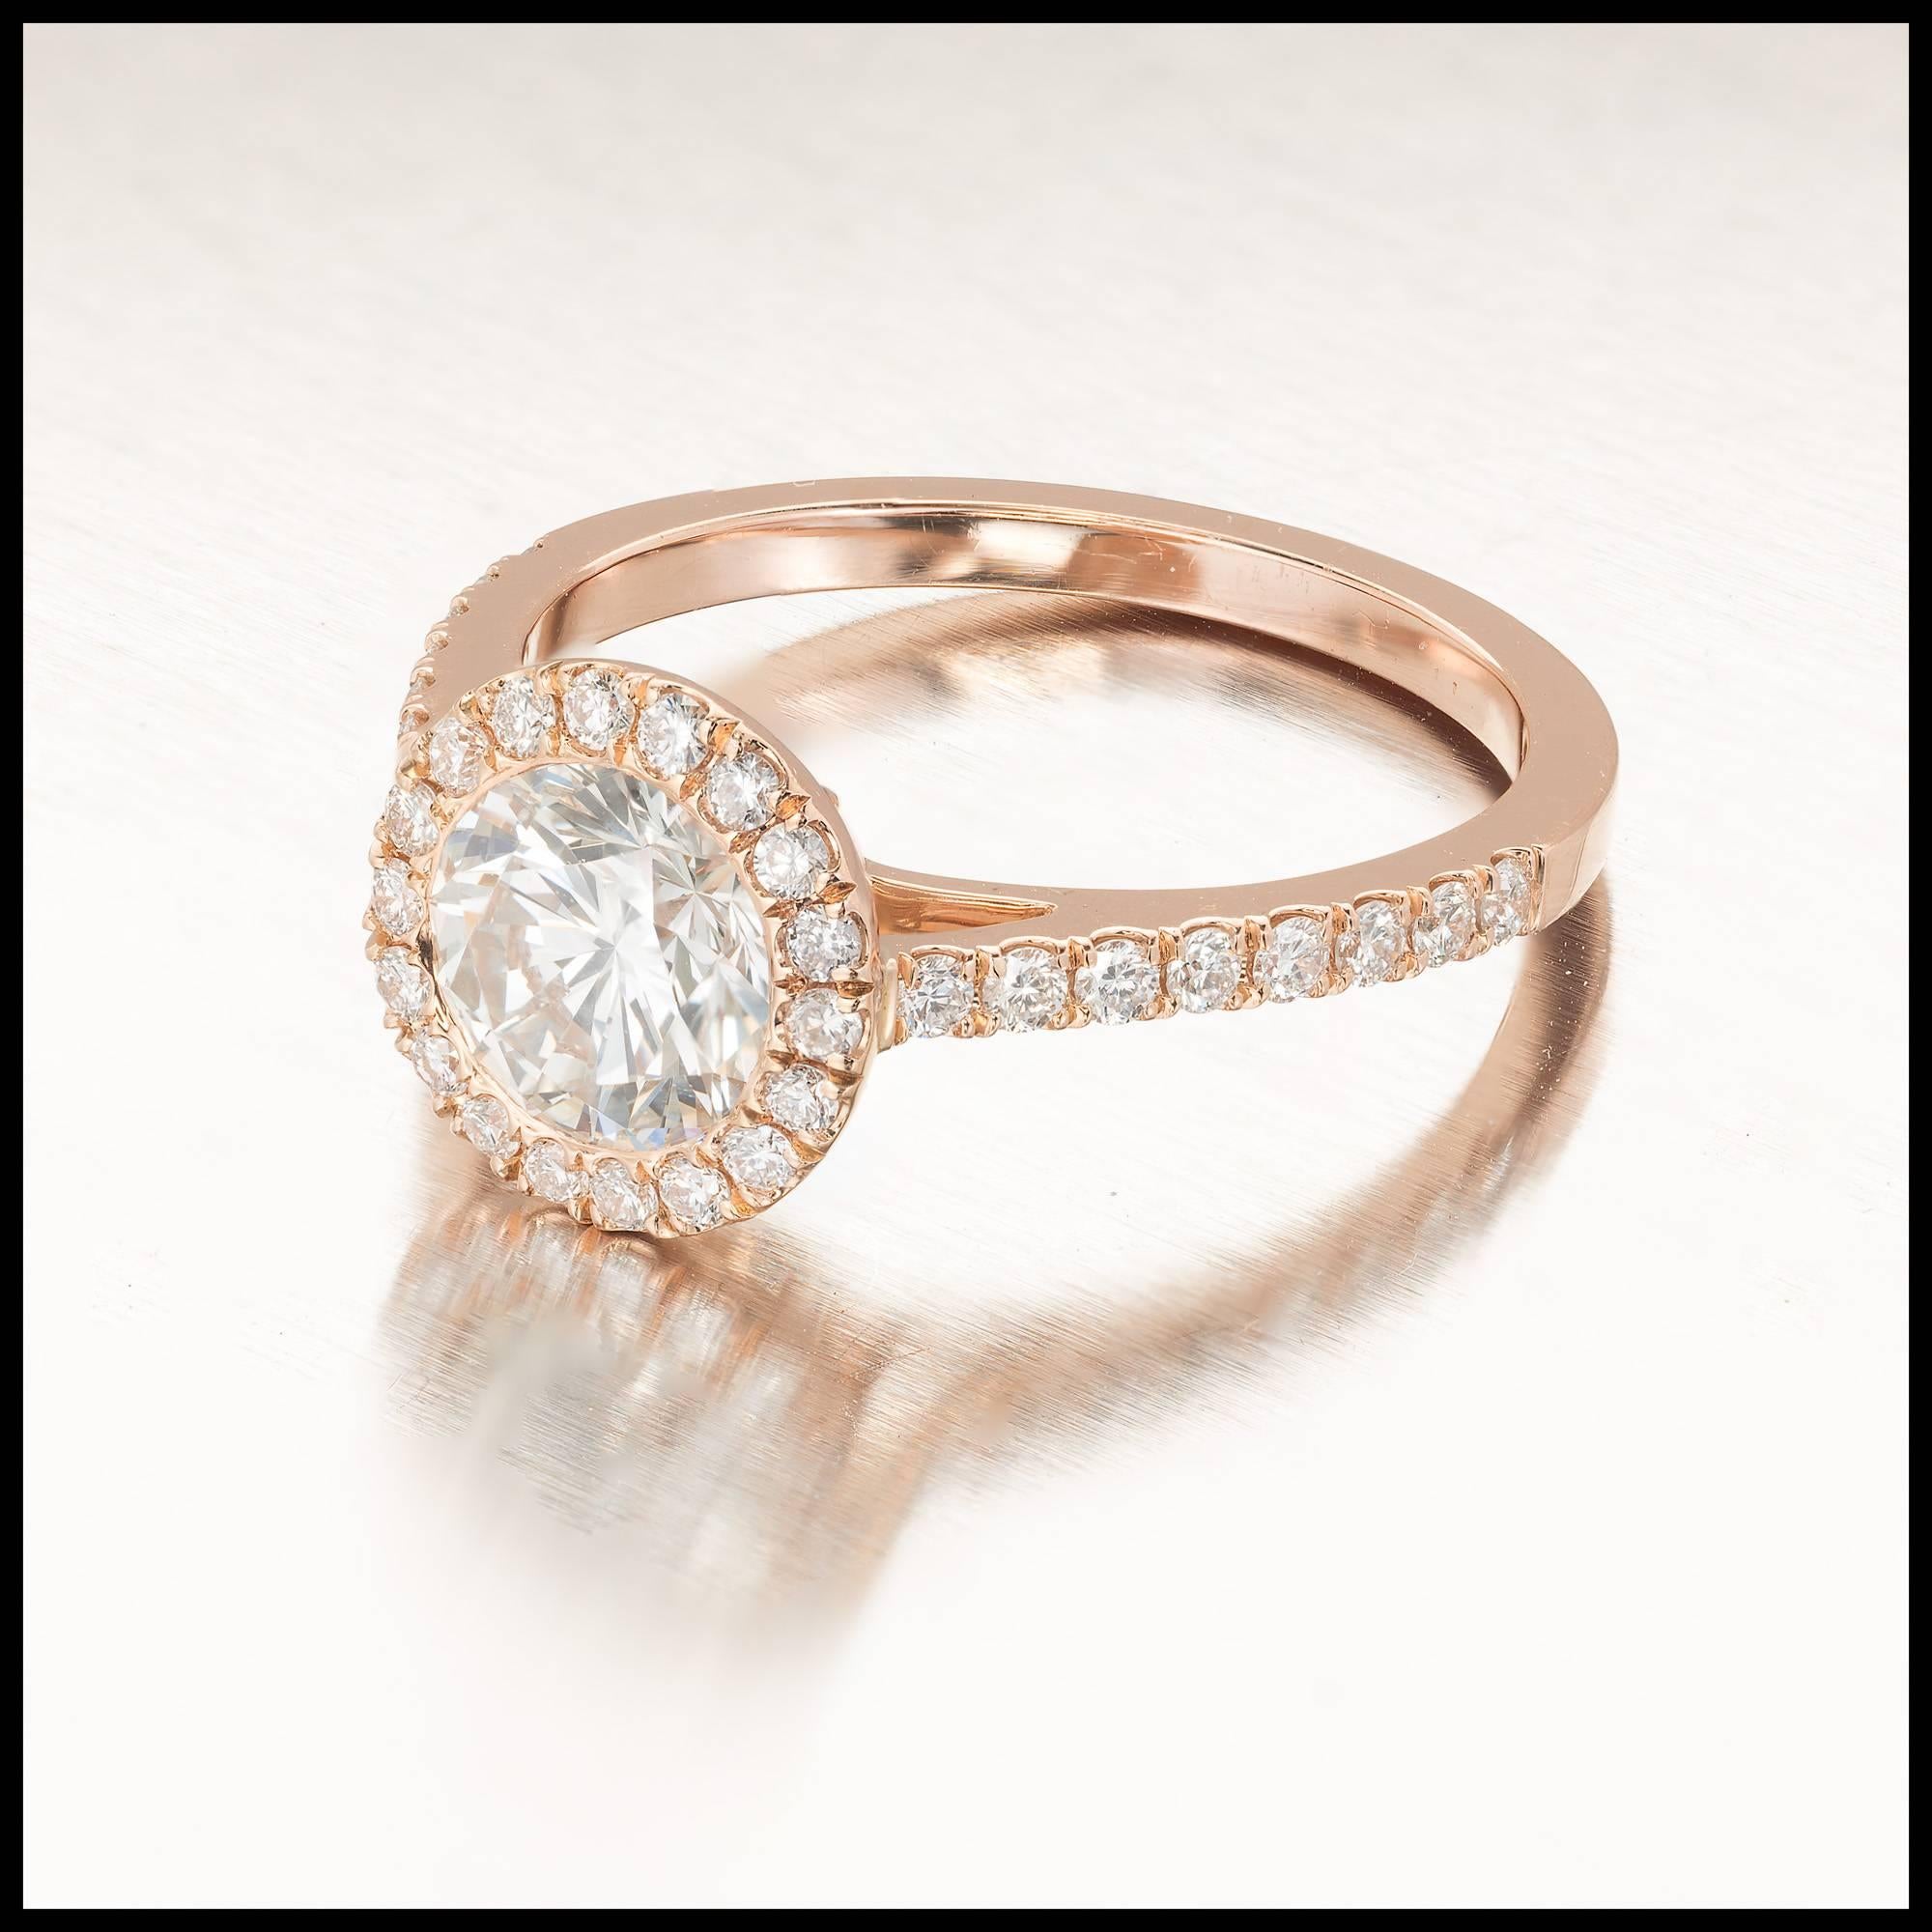 Peter Suchy Gia Certified 1.06 Carat Diamond Halo Rose Gold Engagement Ring In Good Condition For Sale In Stamford, CT